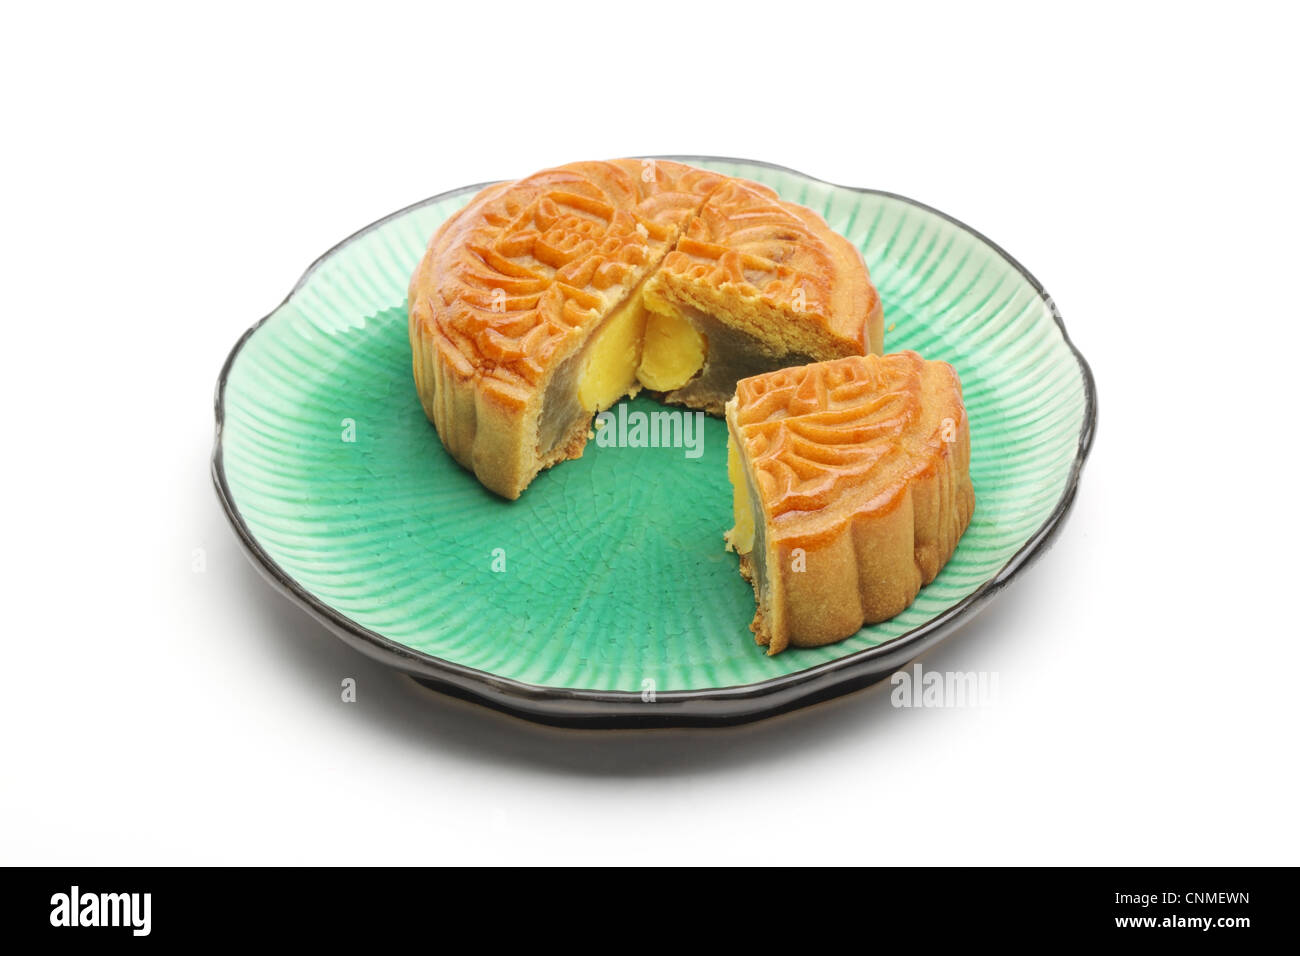 Chinese moon cake, food for Chinese mid-autumn festival. Stock Photo